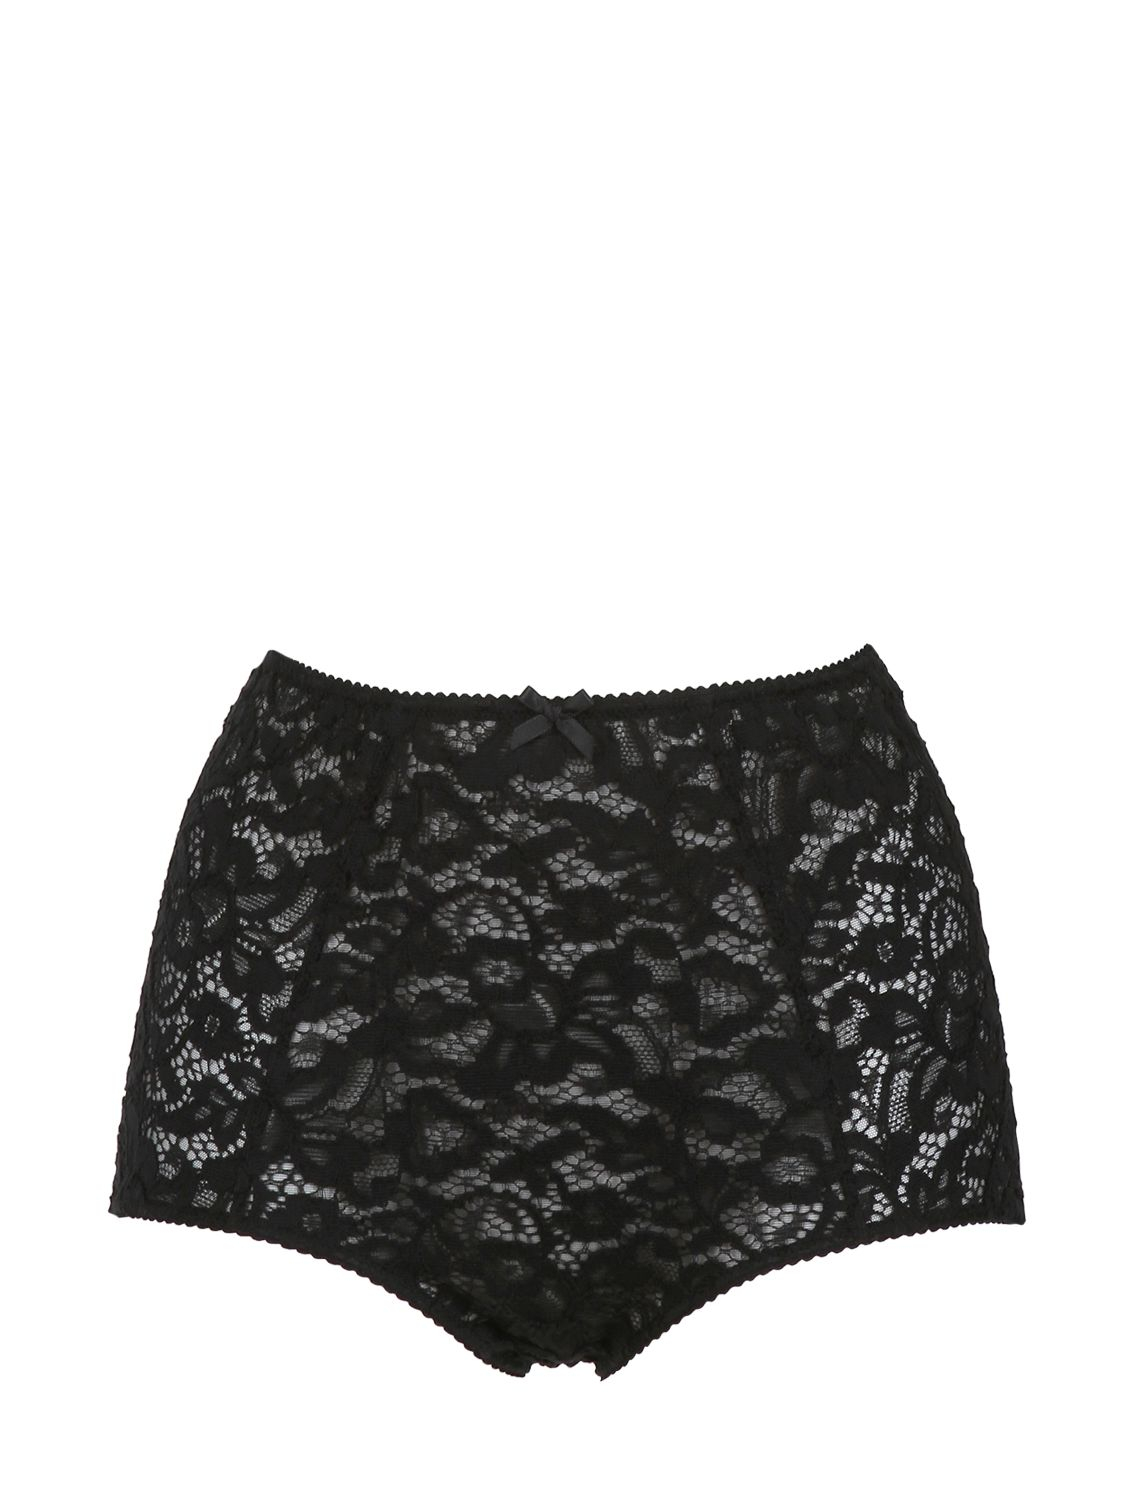 Lyst - Dolce & Gabbana Cotton Lace High Waisted Brief in Black